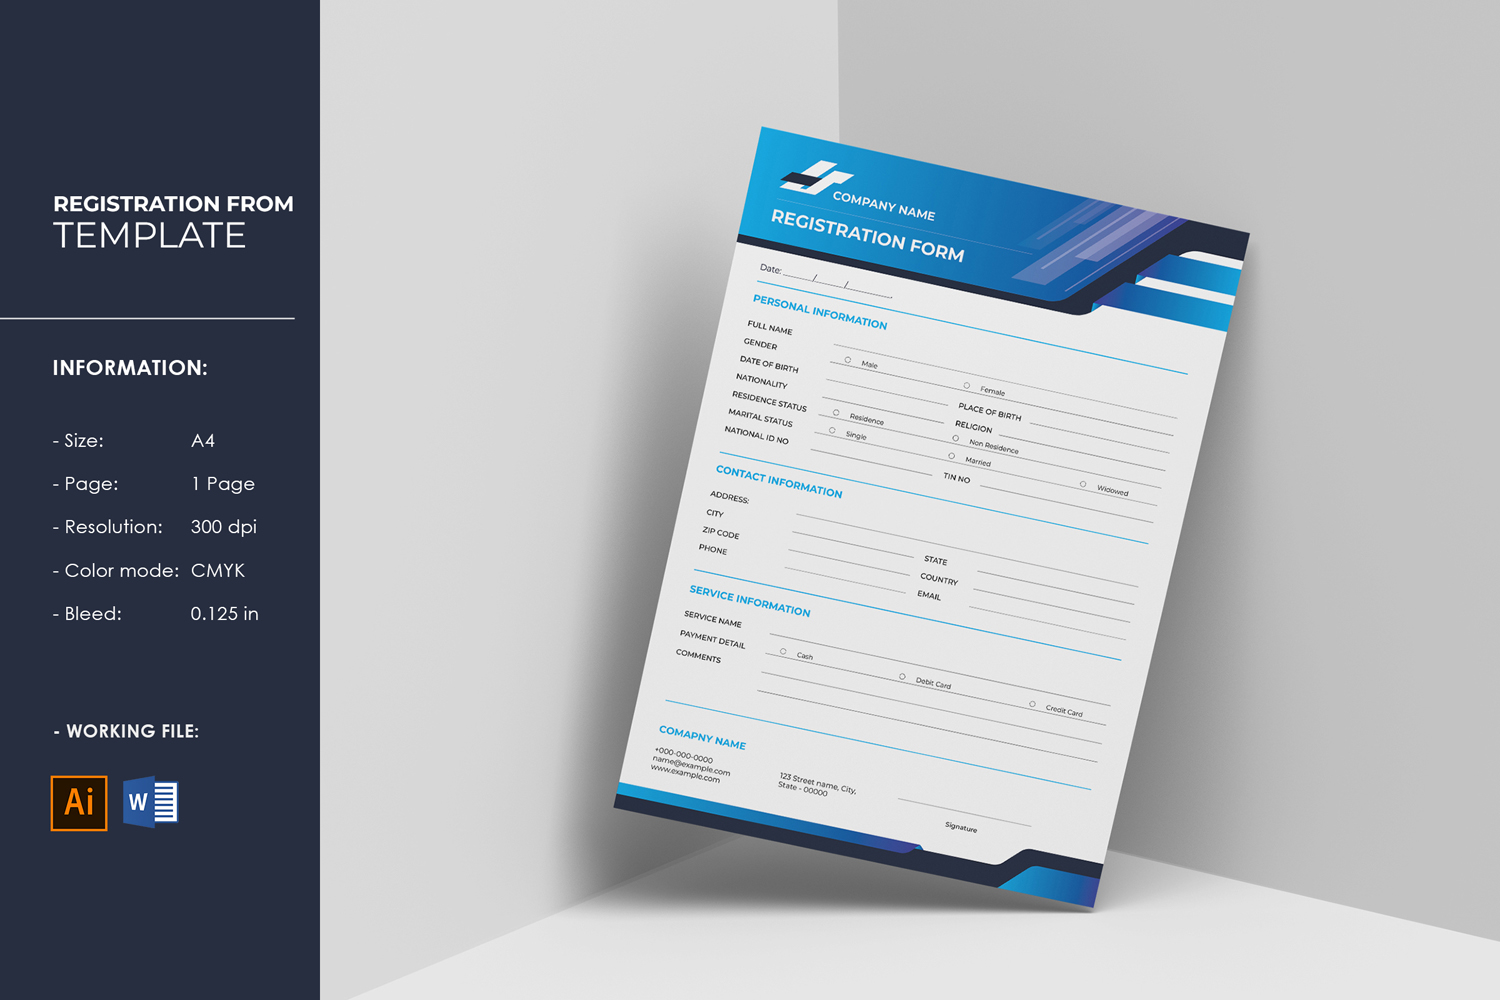 Registration Form Template. Ms word and Illustrator Template